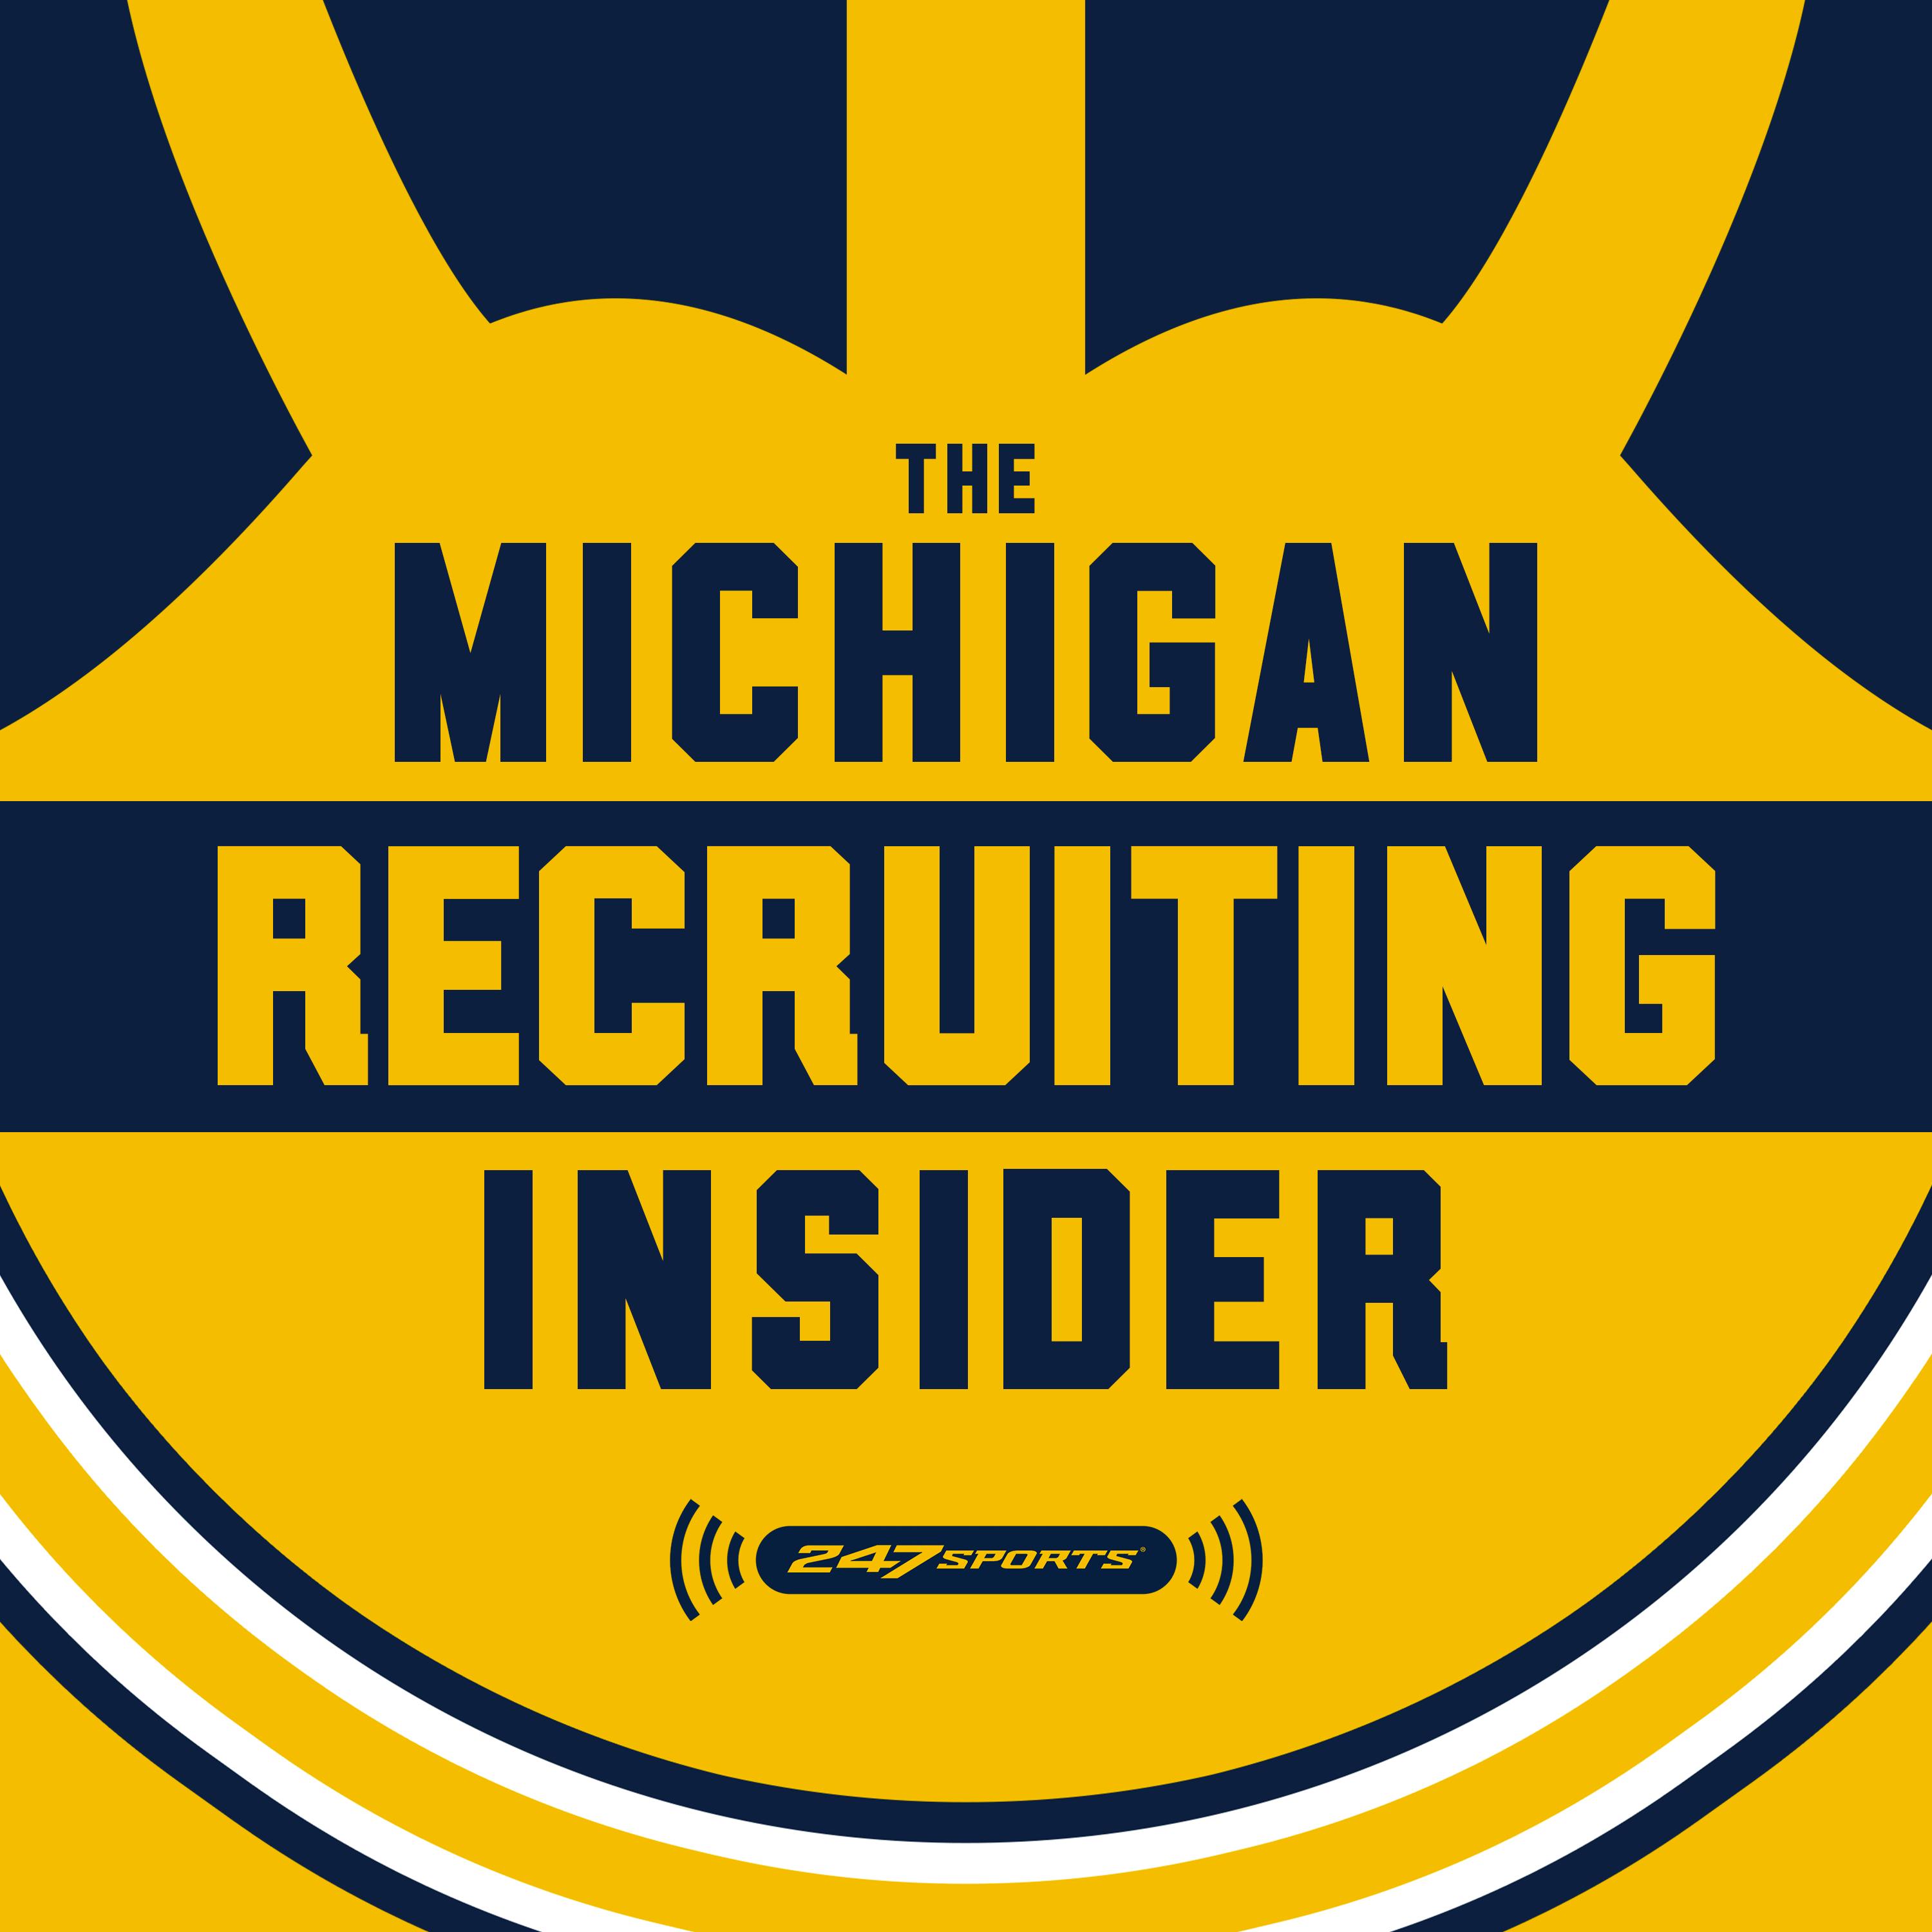 Old fball targets re-emerge; Big bball visit weekend on tap - Michigan Recruiting Insider